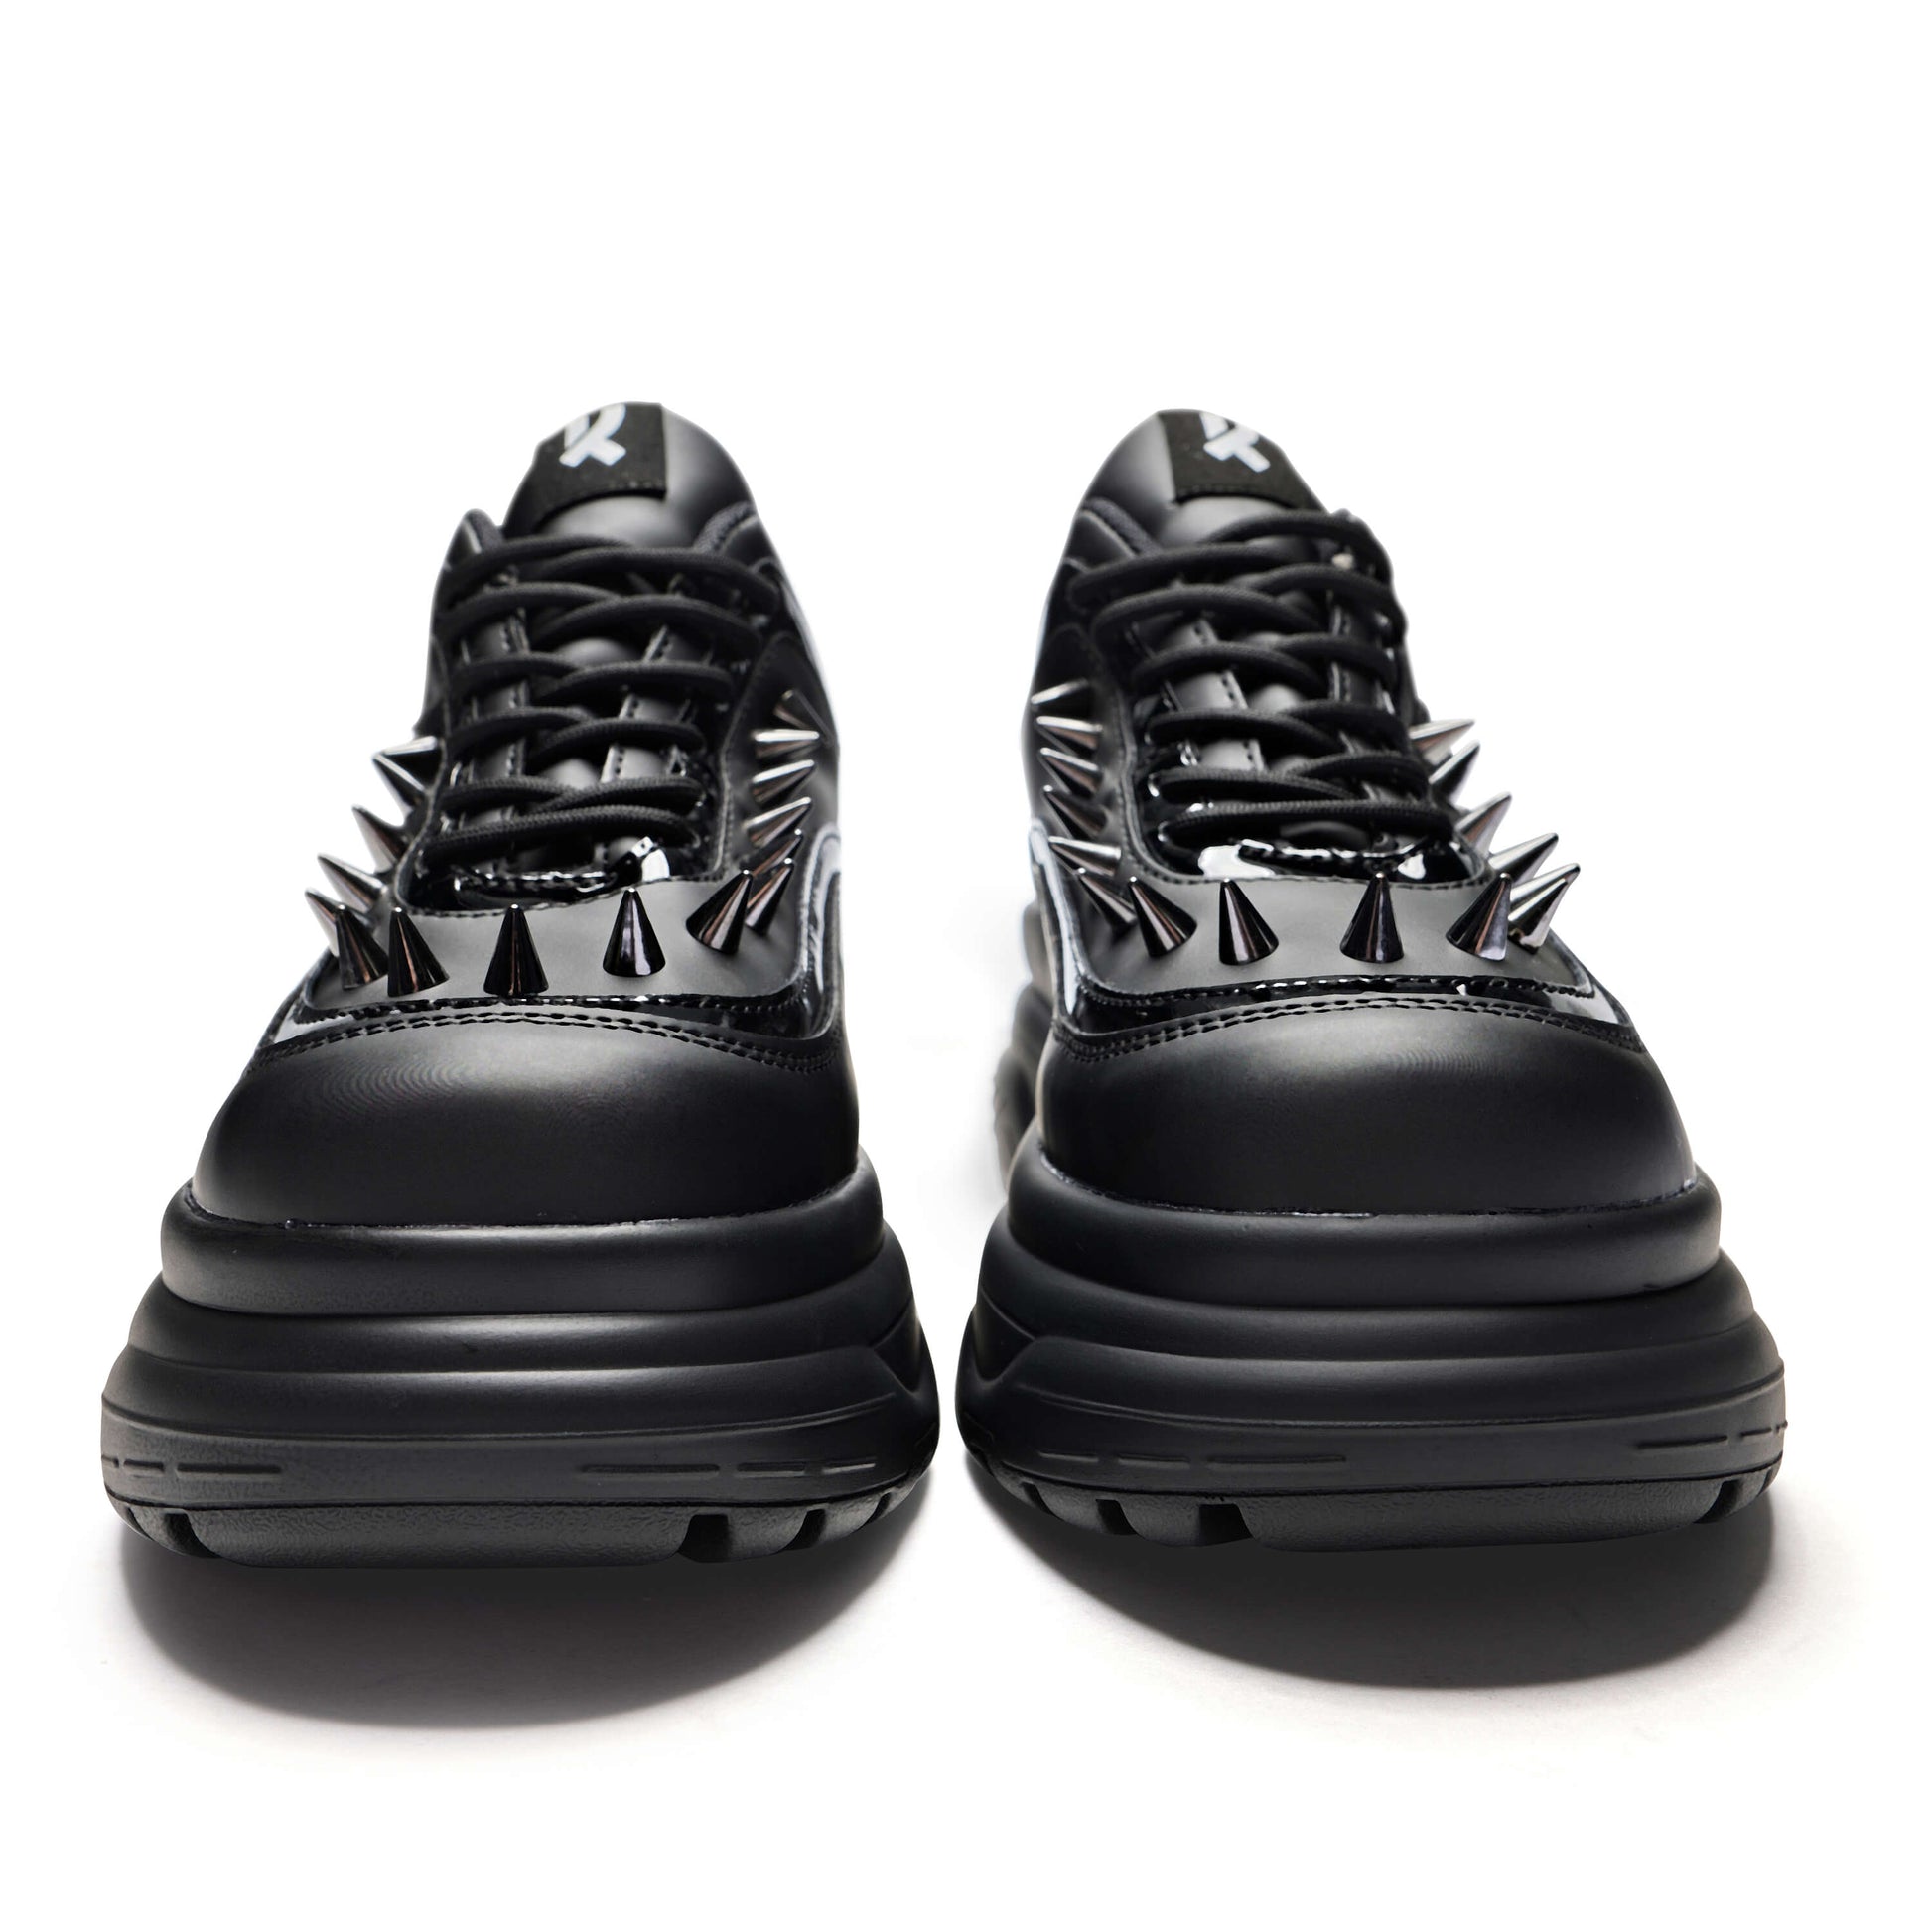 Bane of Exile Men's Trainers - Trainers - KOI Footwear - Black - Front View